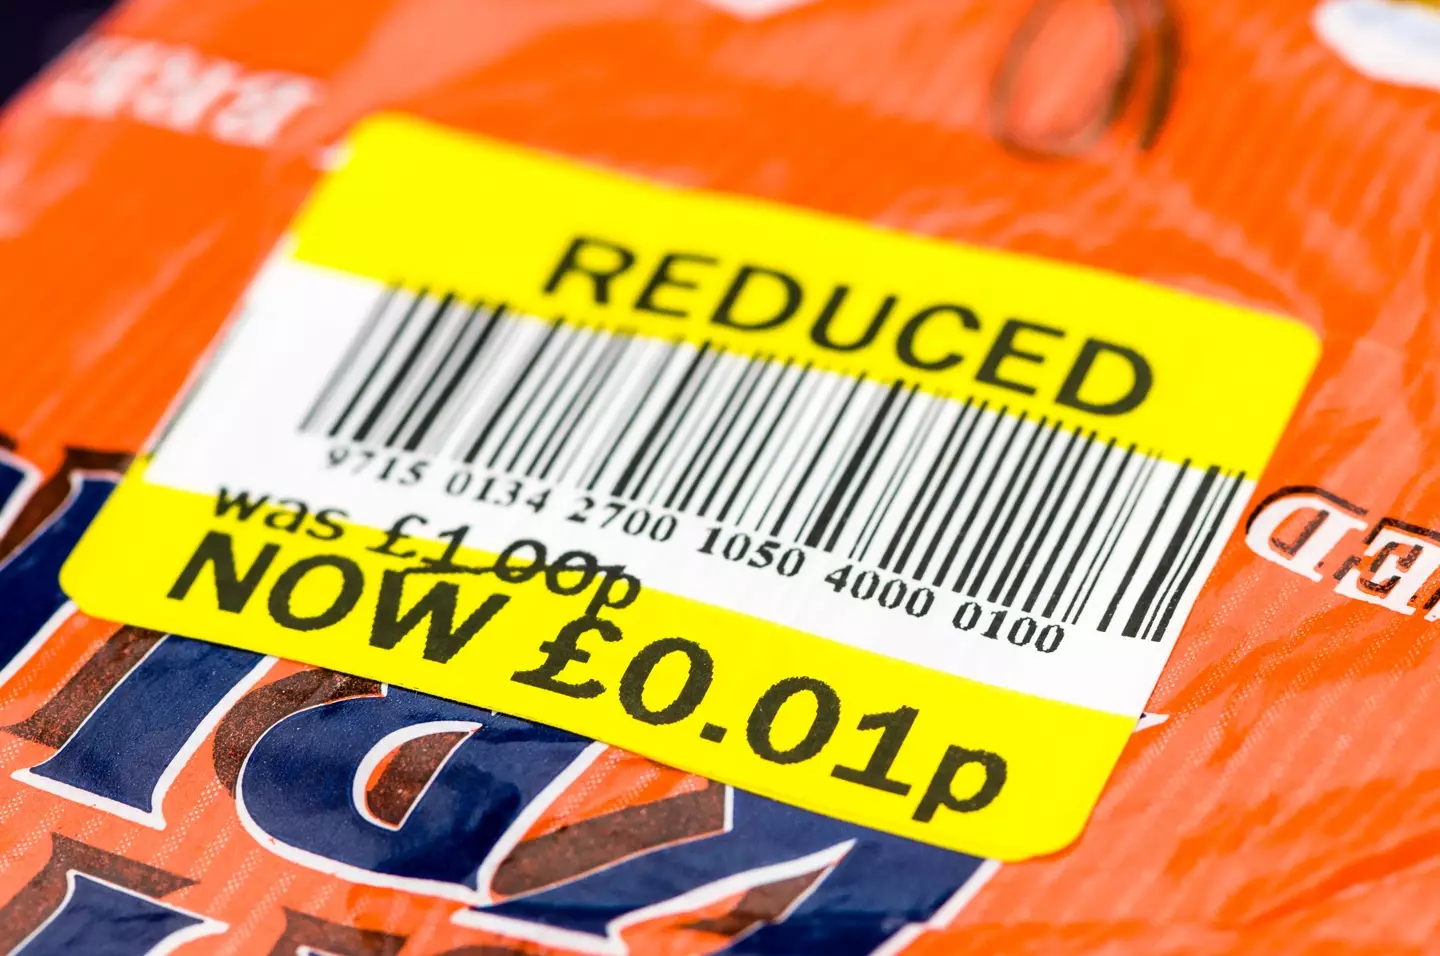 A YouGov survey revealed a third of shoppers would use the reduced section more if it appeared nicer.